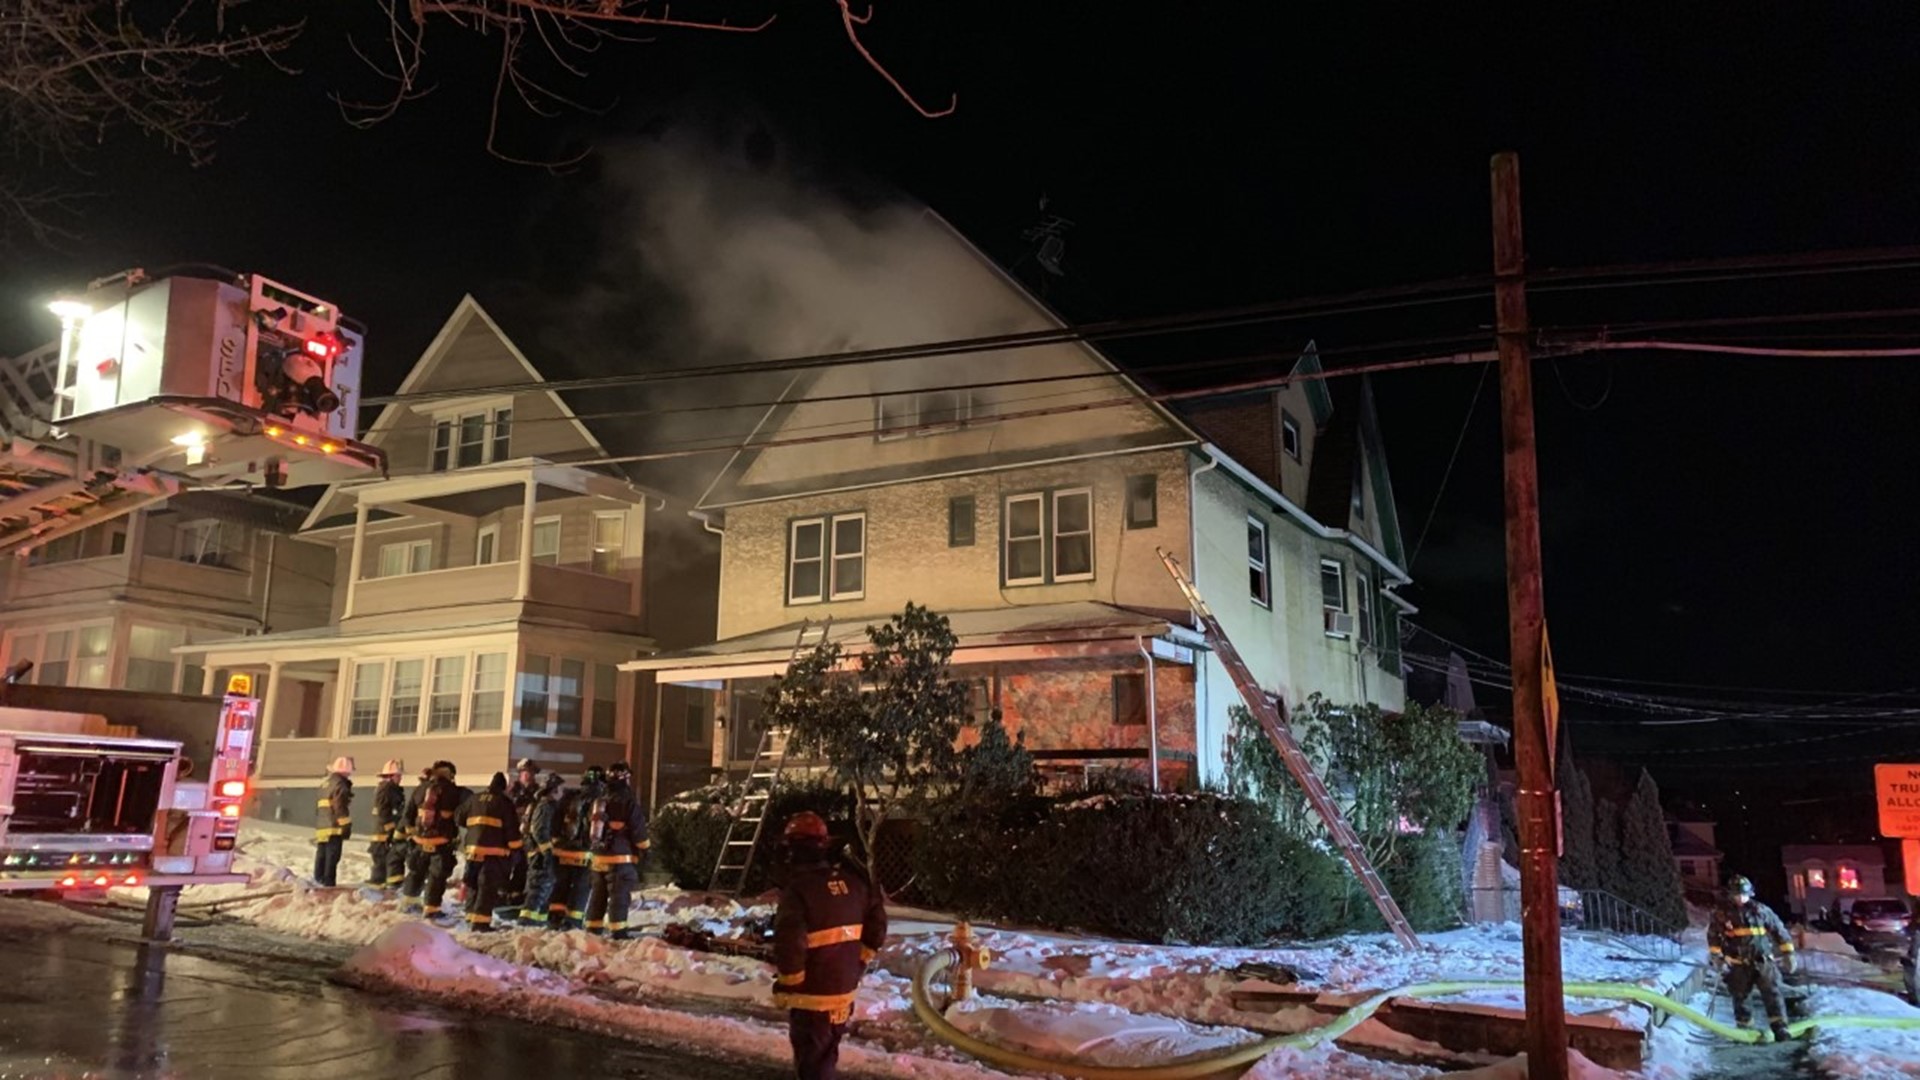 Flames broke out around 7:30 p.m. on the corner of Wheeler Avenue and Linden Street Saturday night.